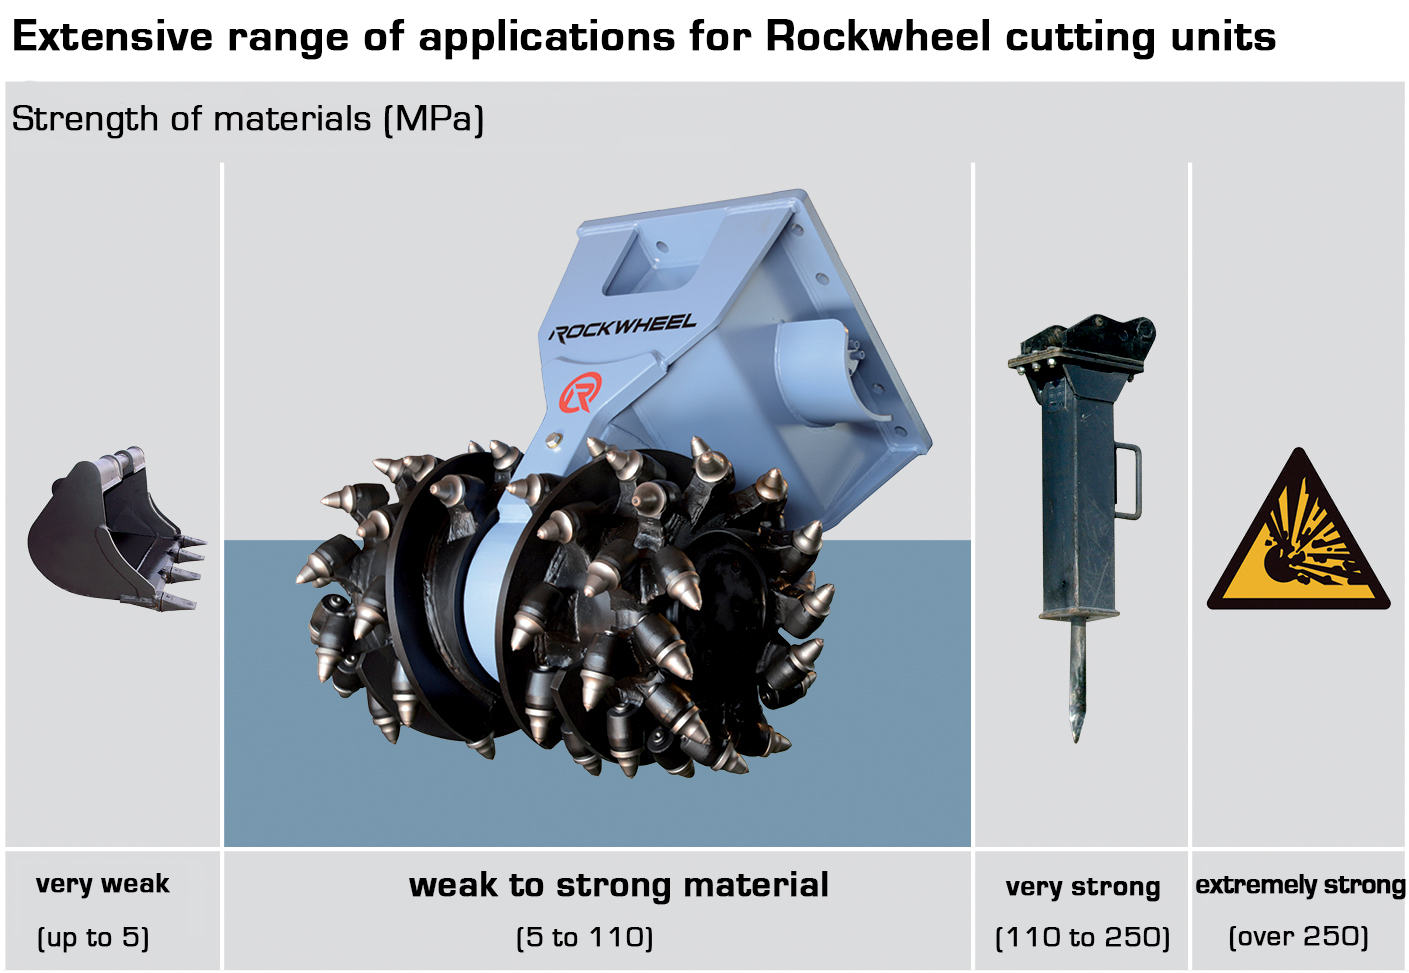 Extensive range of applications for Rockwheel cutting units